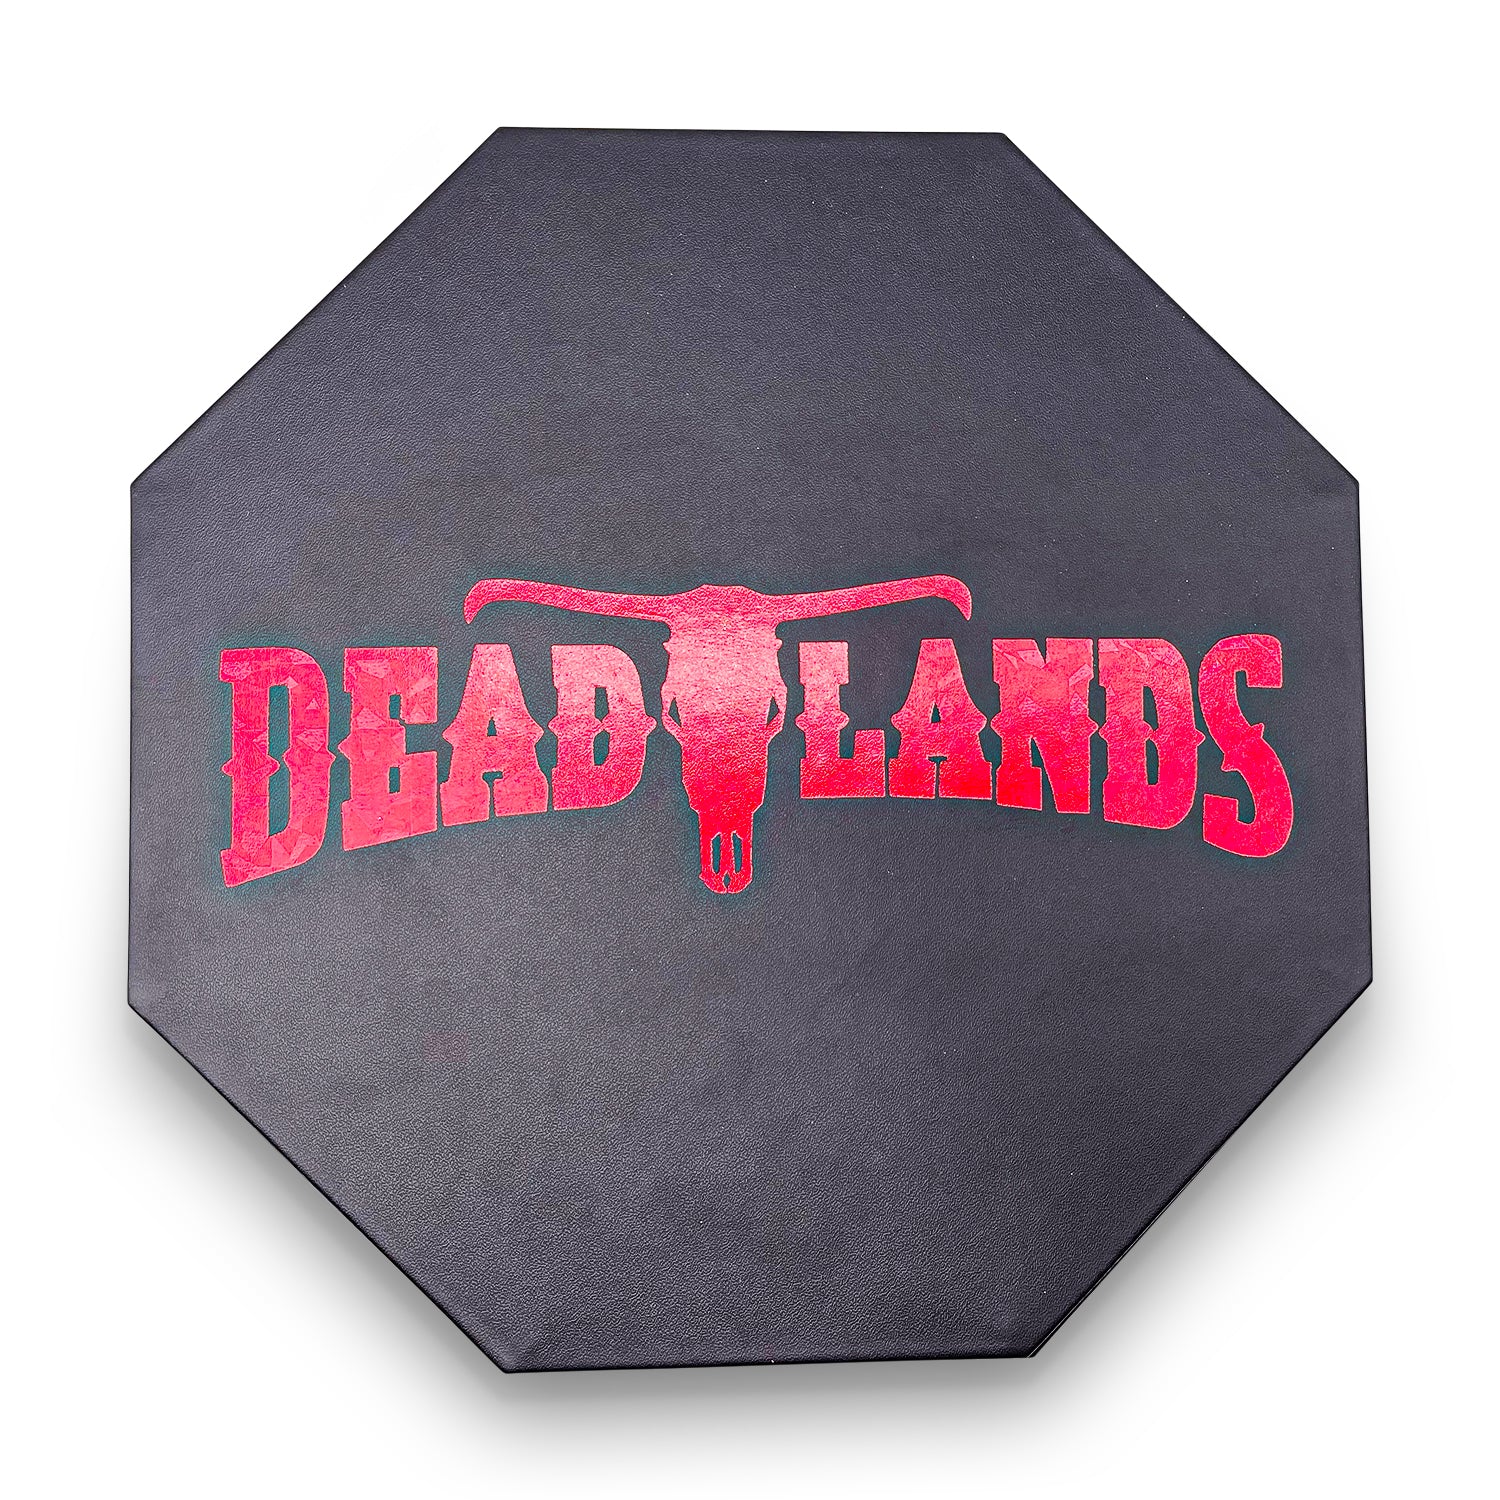 Red Deadlands™ Tray of Holding™ Dice Tray by Norse Foundry